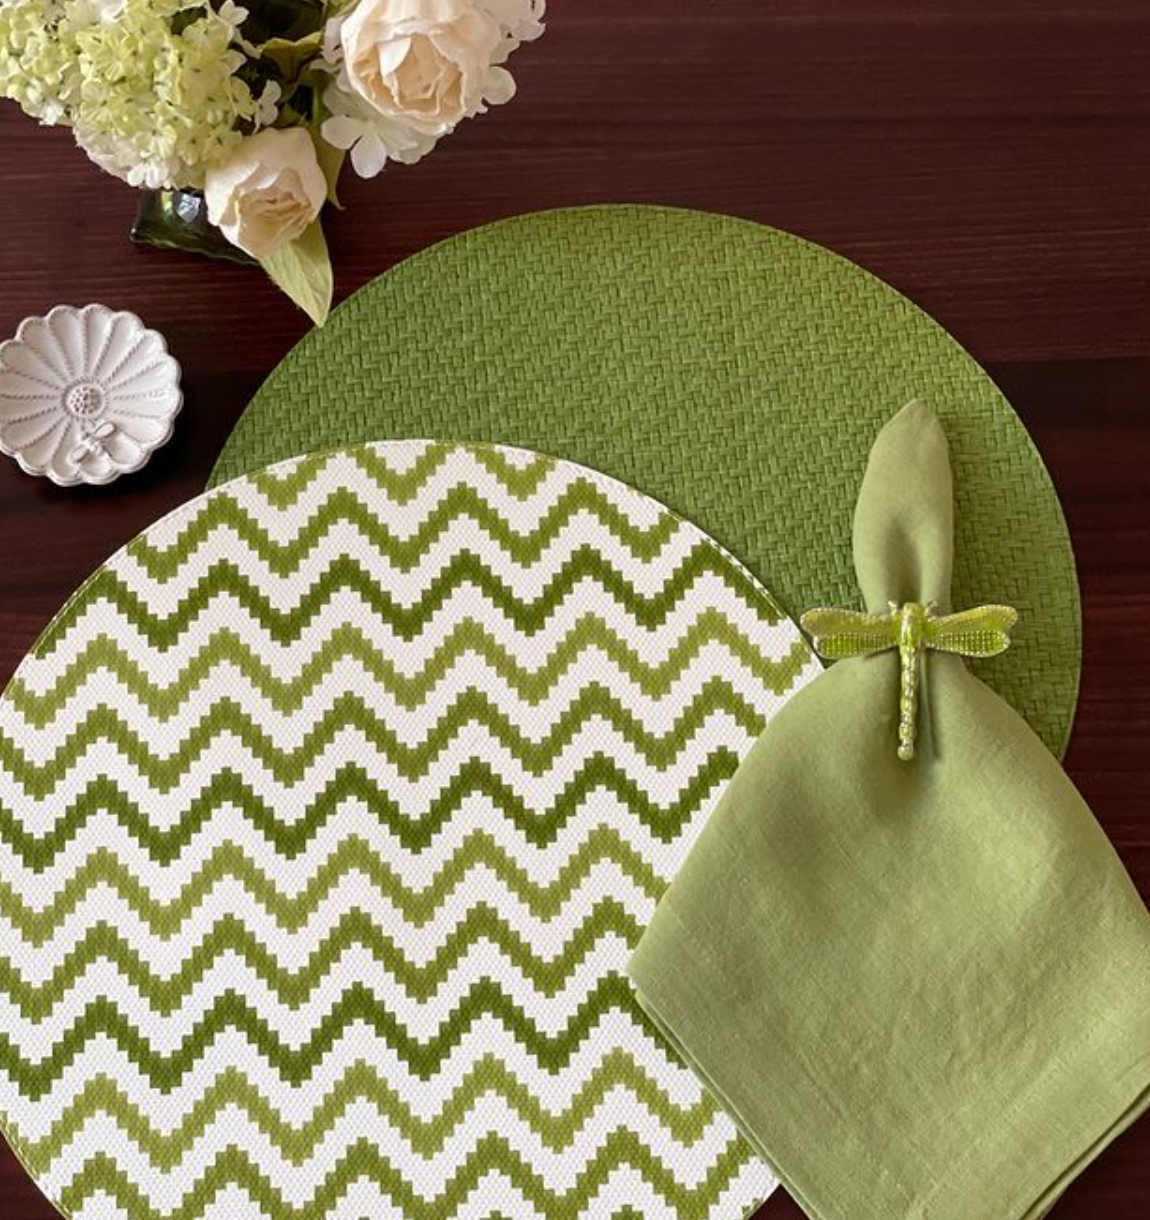 Wicker Round Placemat Set of 4